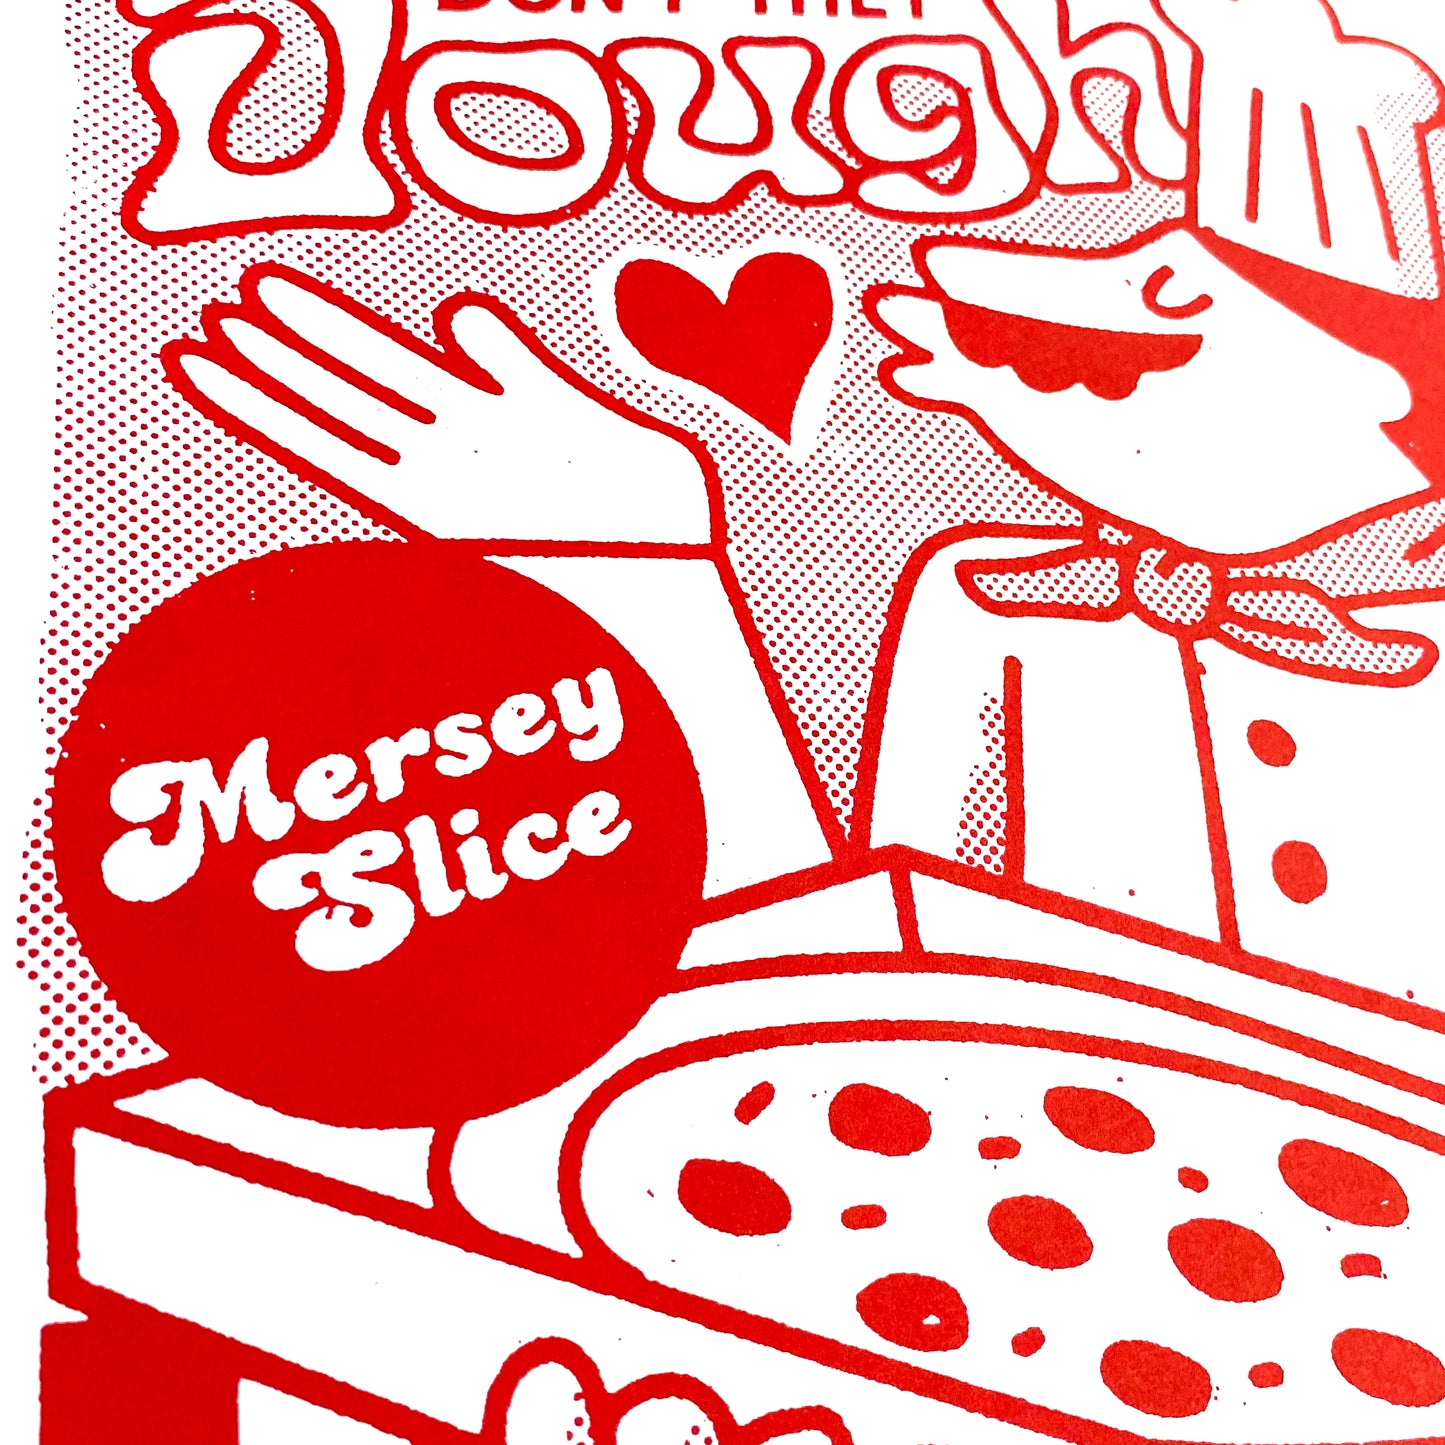 Mersey Slice - The Pizza Place that needs to be!